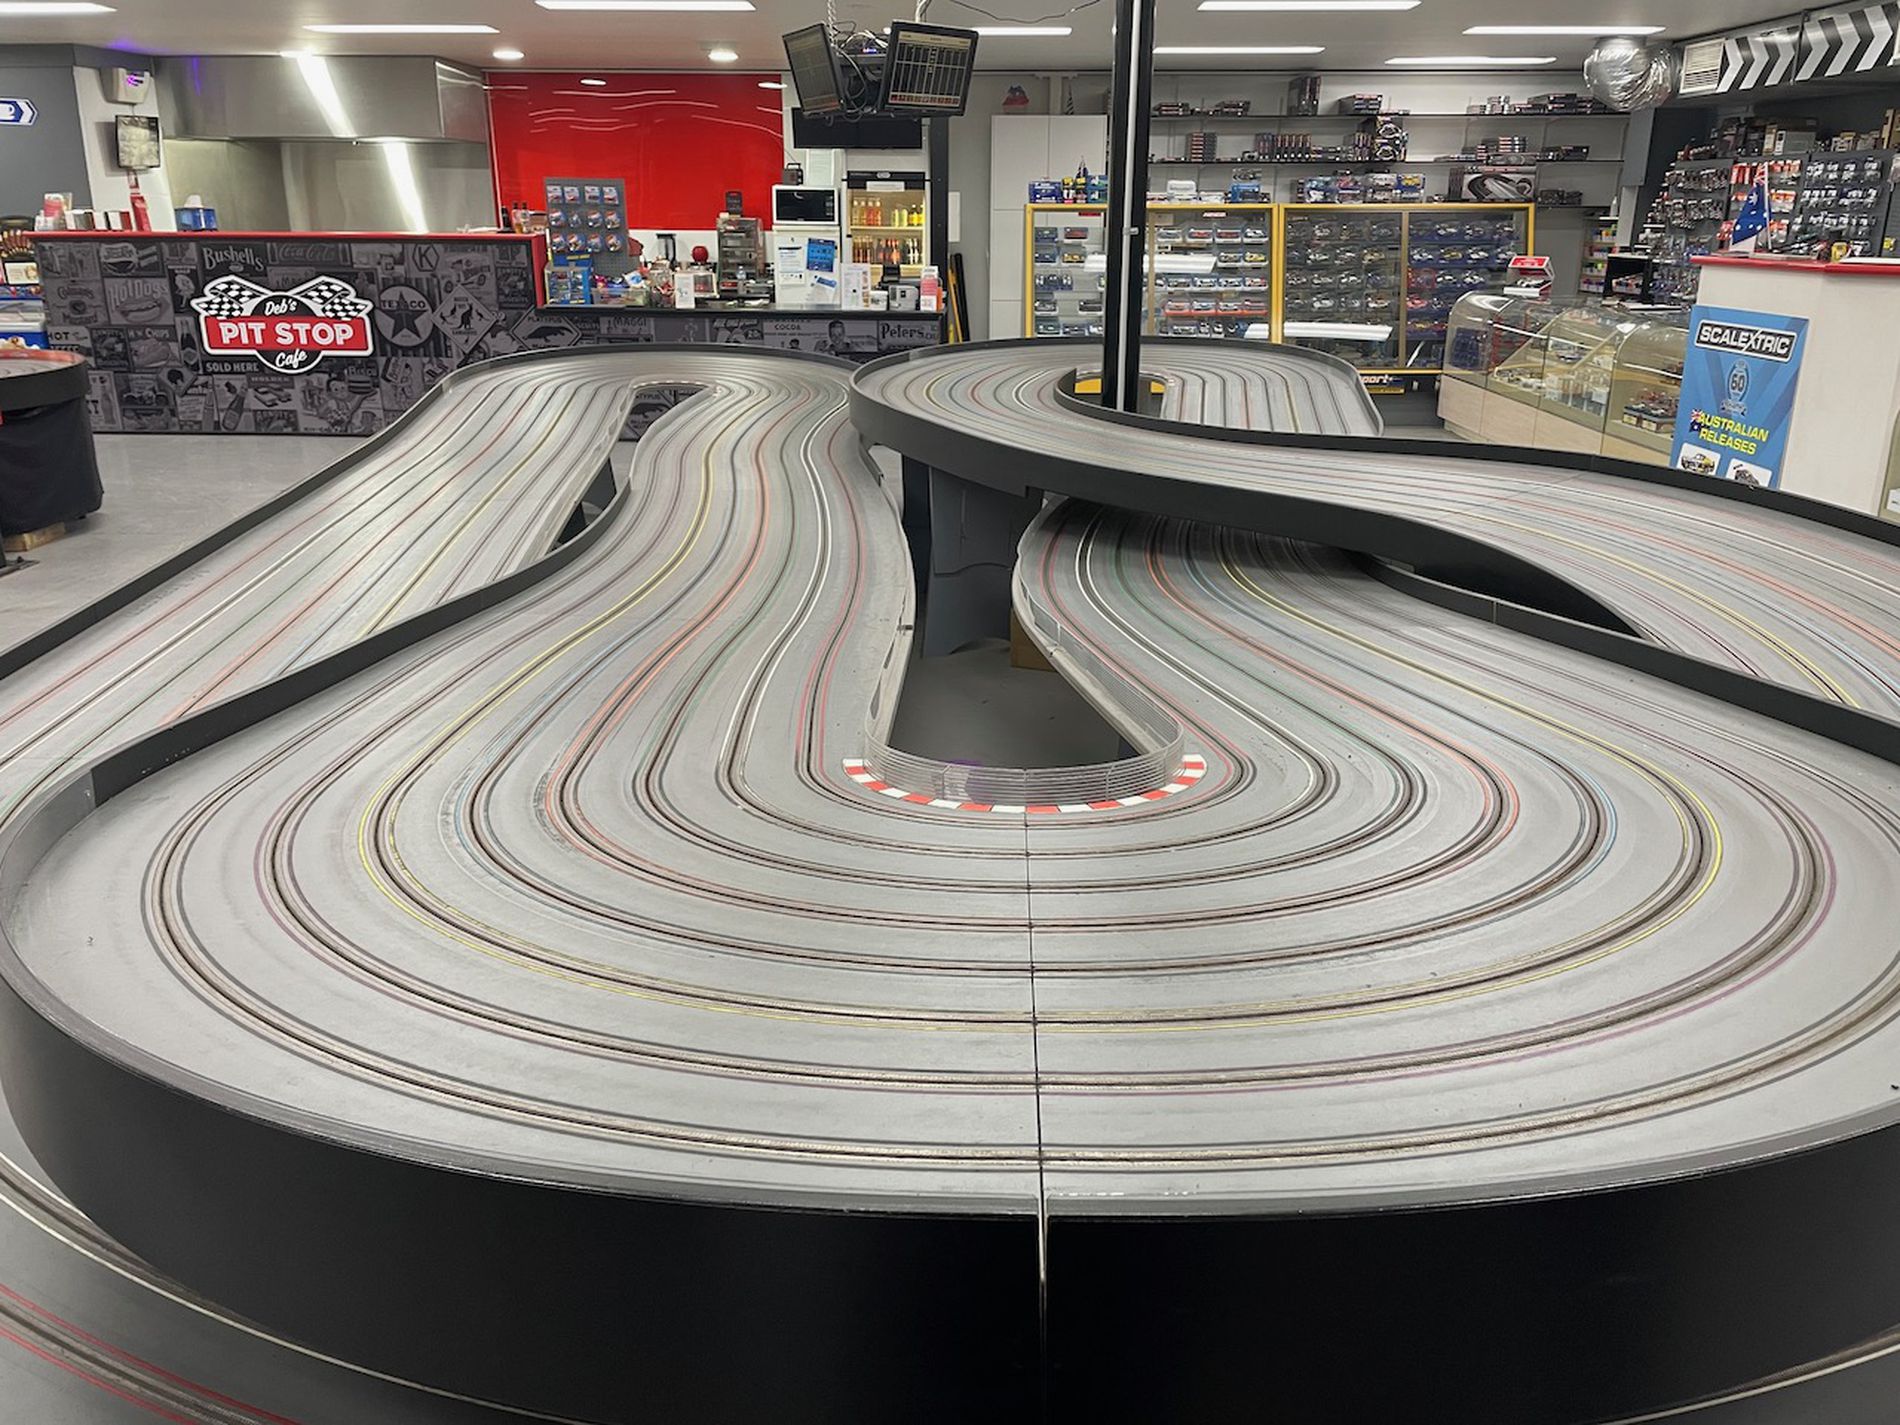 Australia’s Largest Slot Car Racing and Retail Center Business For Sale